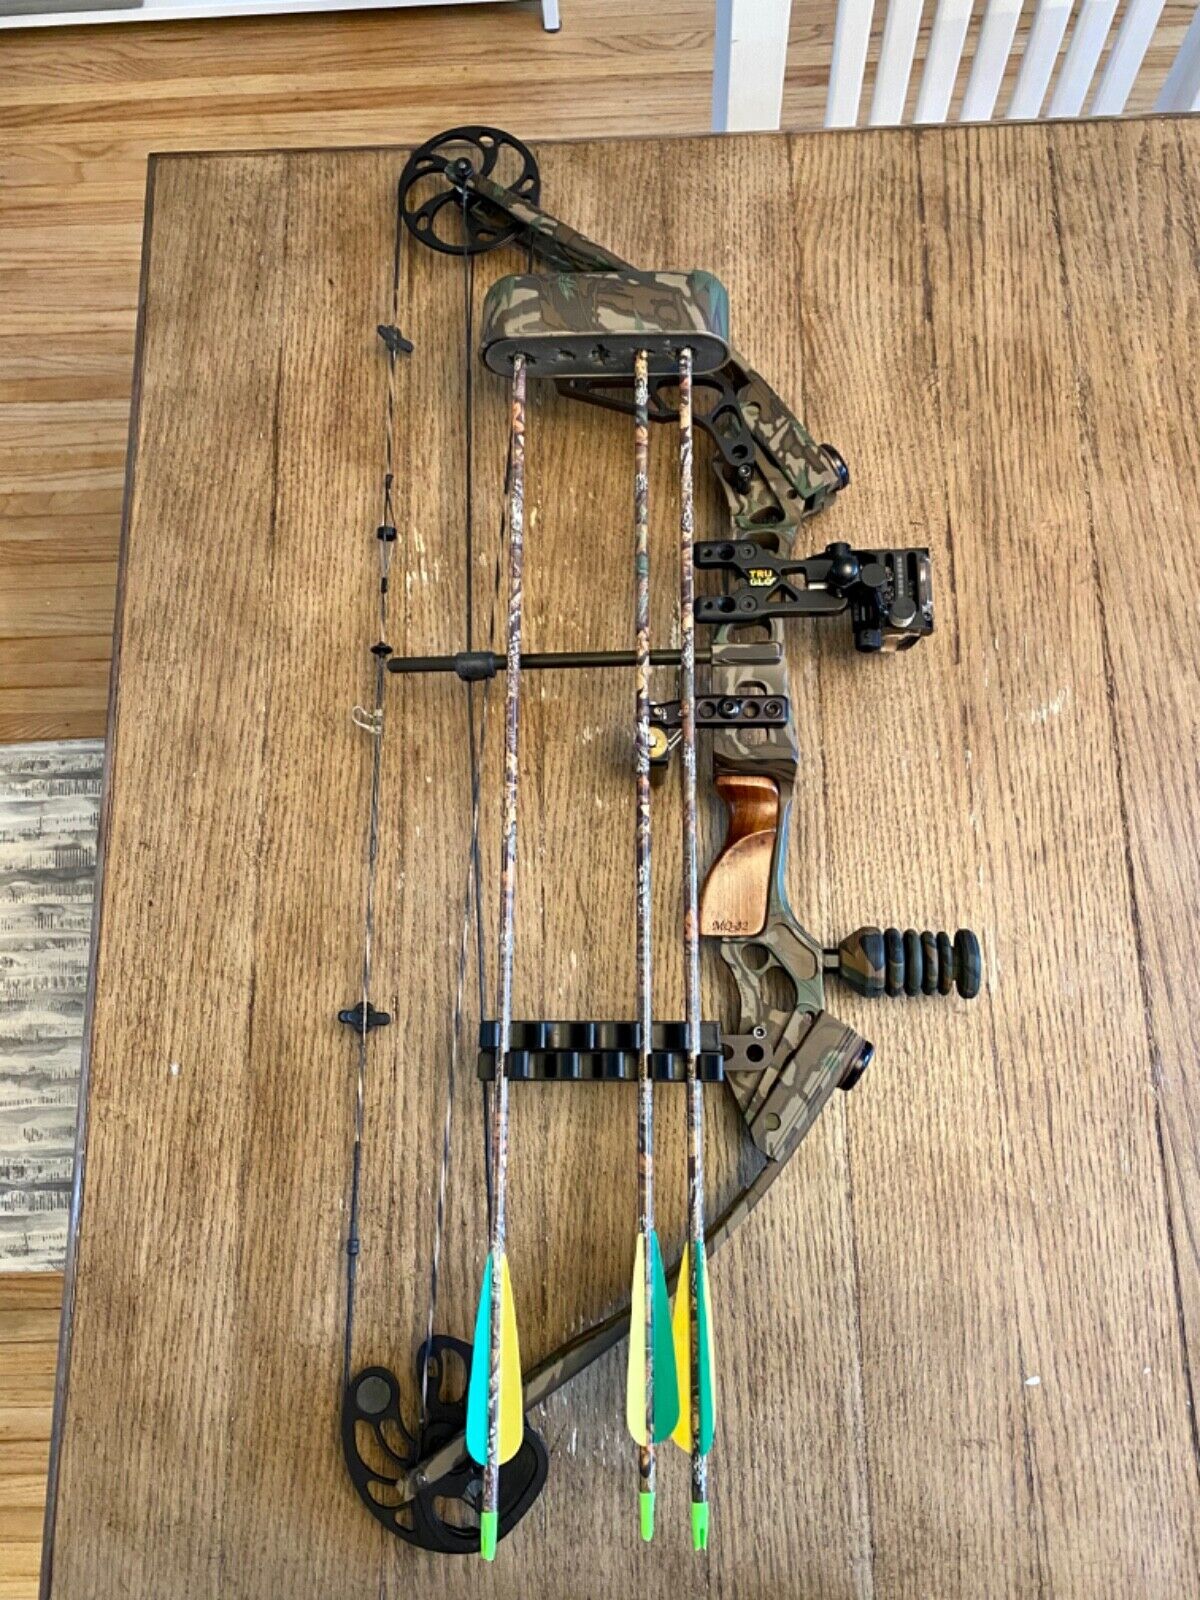 Mathews MQ32 Compound Bow - Truglo sight, quiver, hard and s